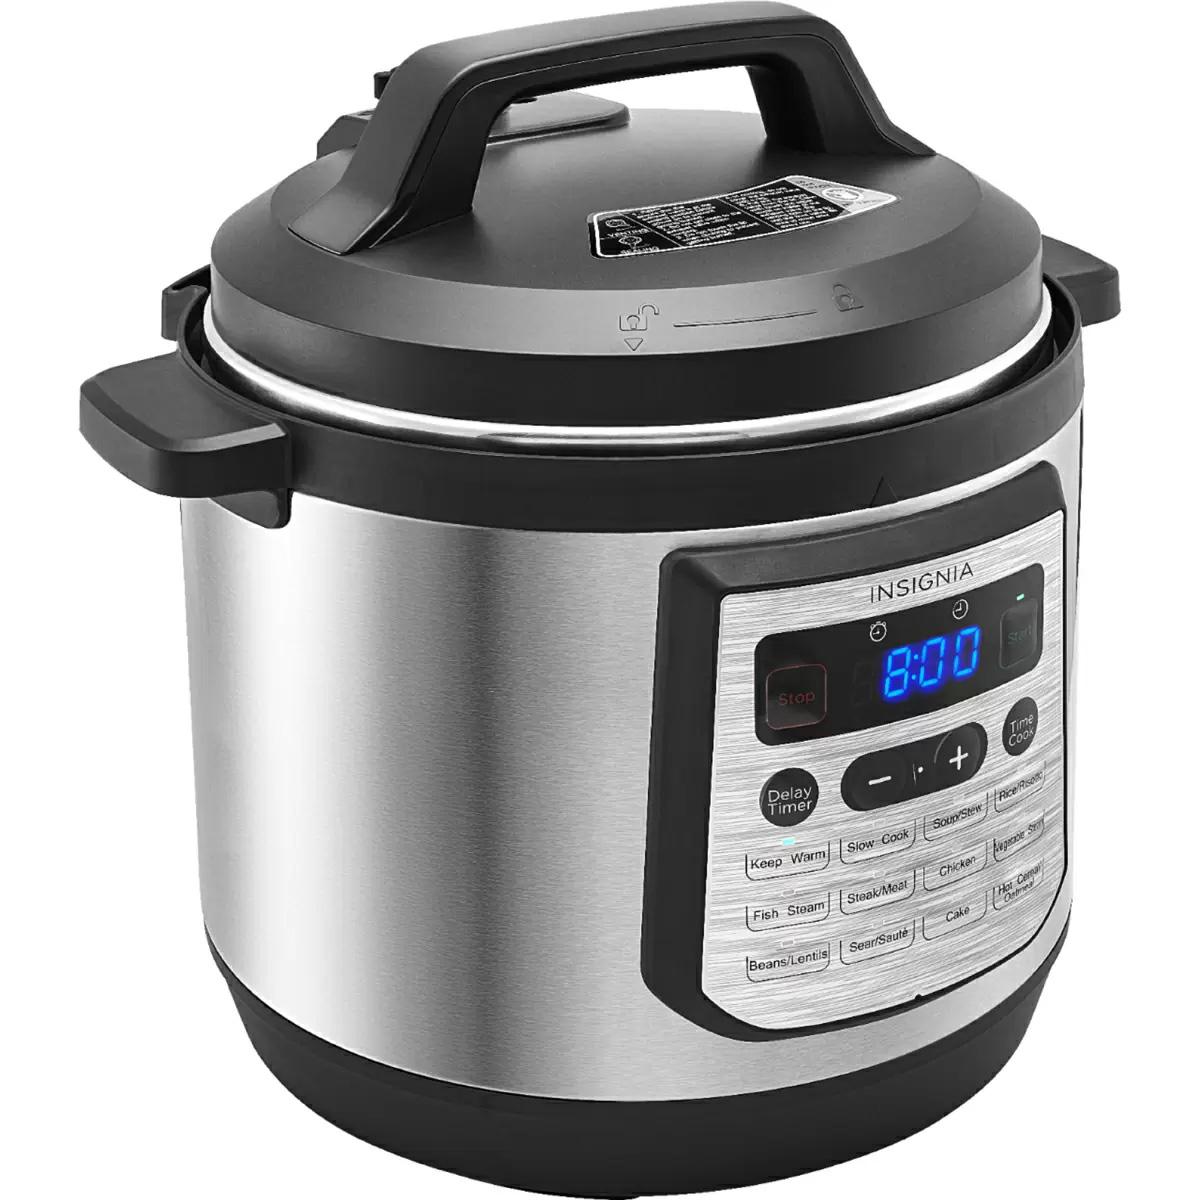 Insignia 8Q Multi-Function Stainless Steel Pressure Cooker for $19.99